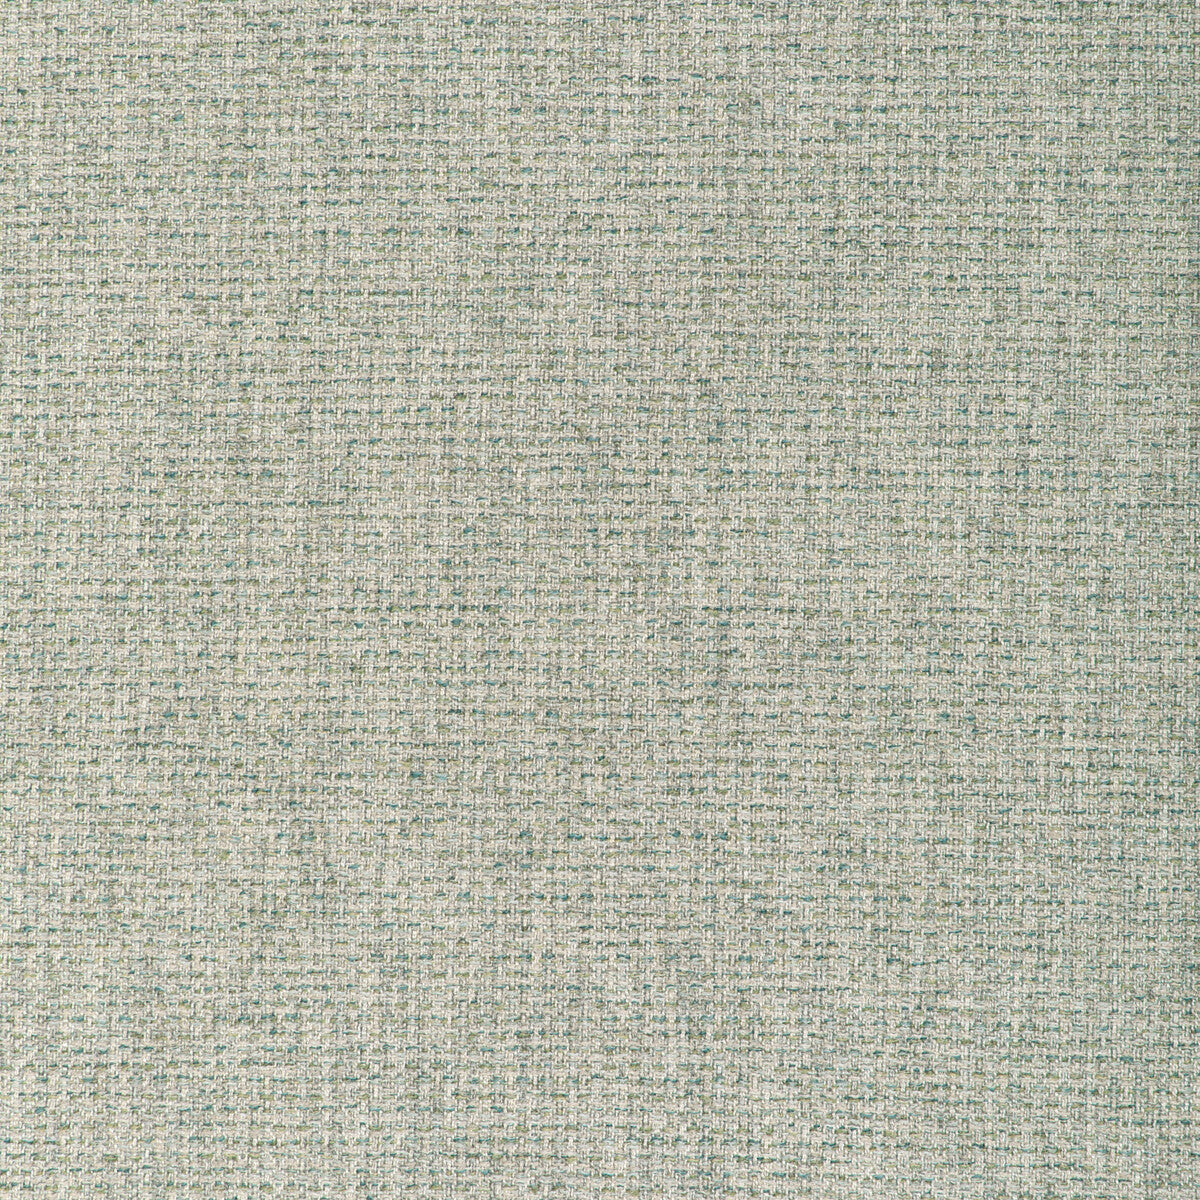 Kravet Design fabric in 37166-1535 color - pattern 37166.1535.0 - by Kravet Design in the Woven Colors collection